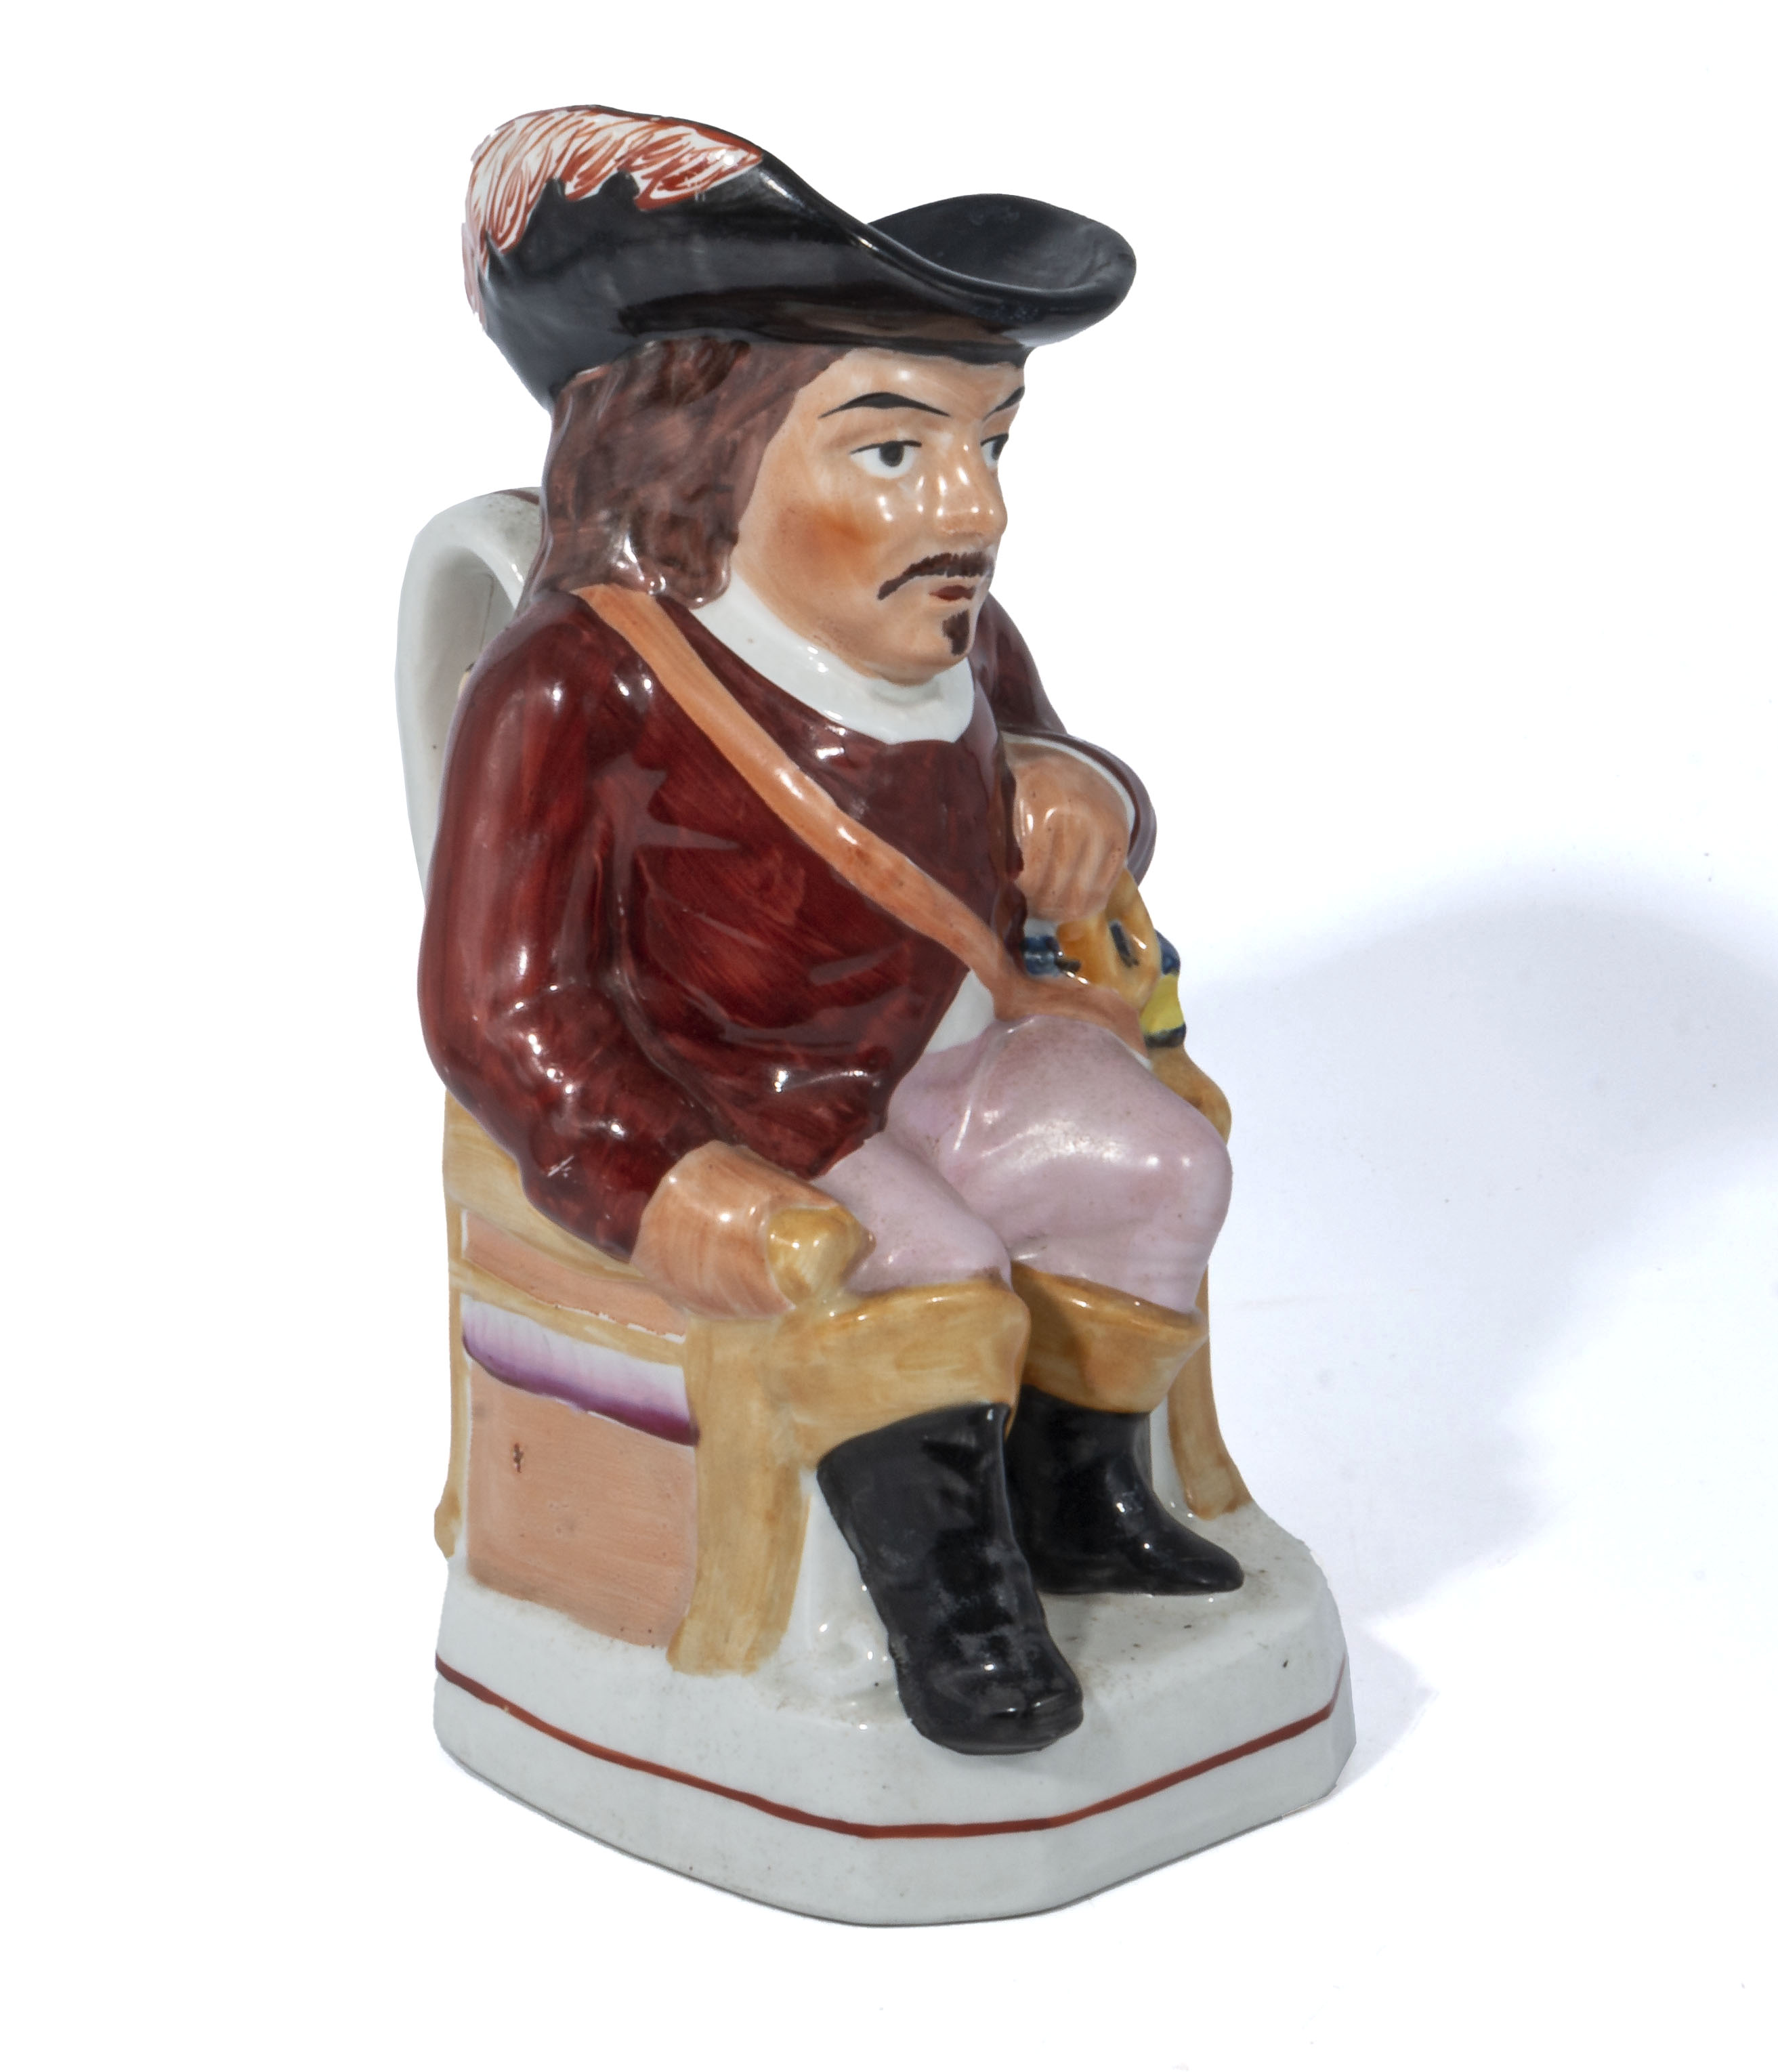 An antique Staffordshire Toby jug, in the form of a seated cavalier wearing a red coat and holding a